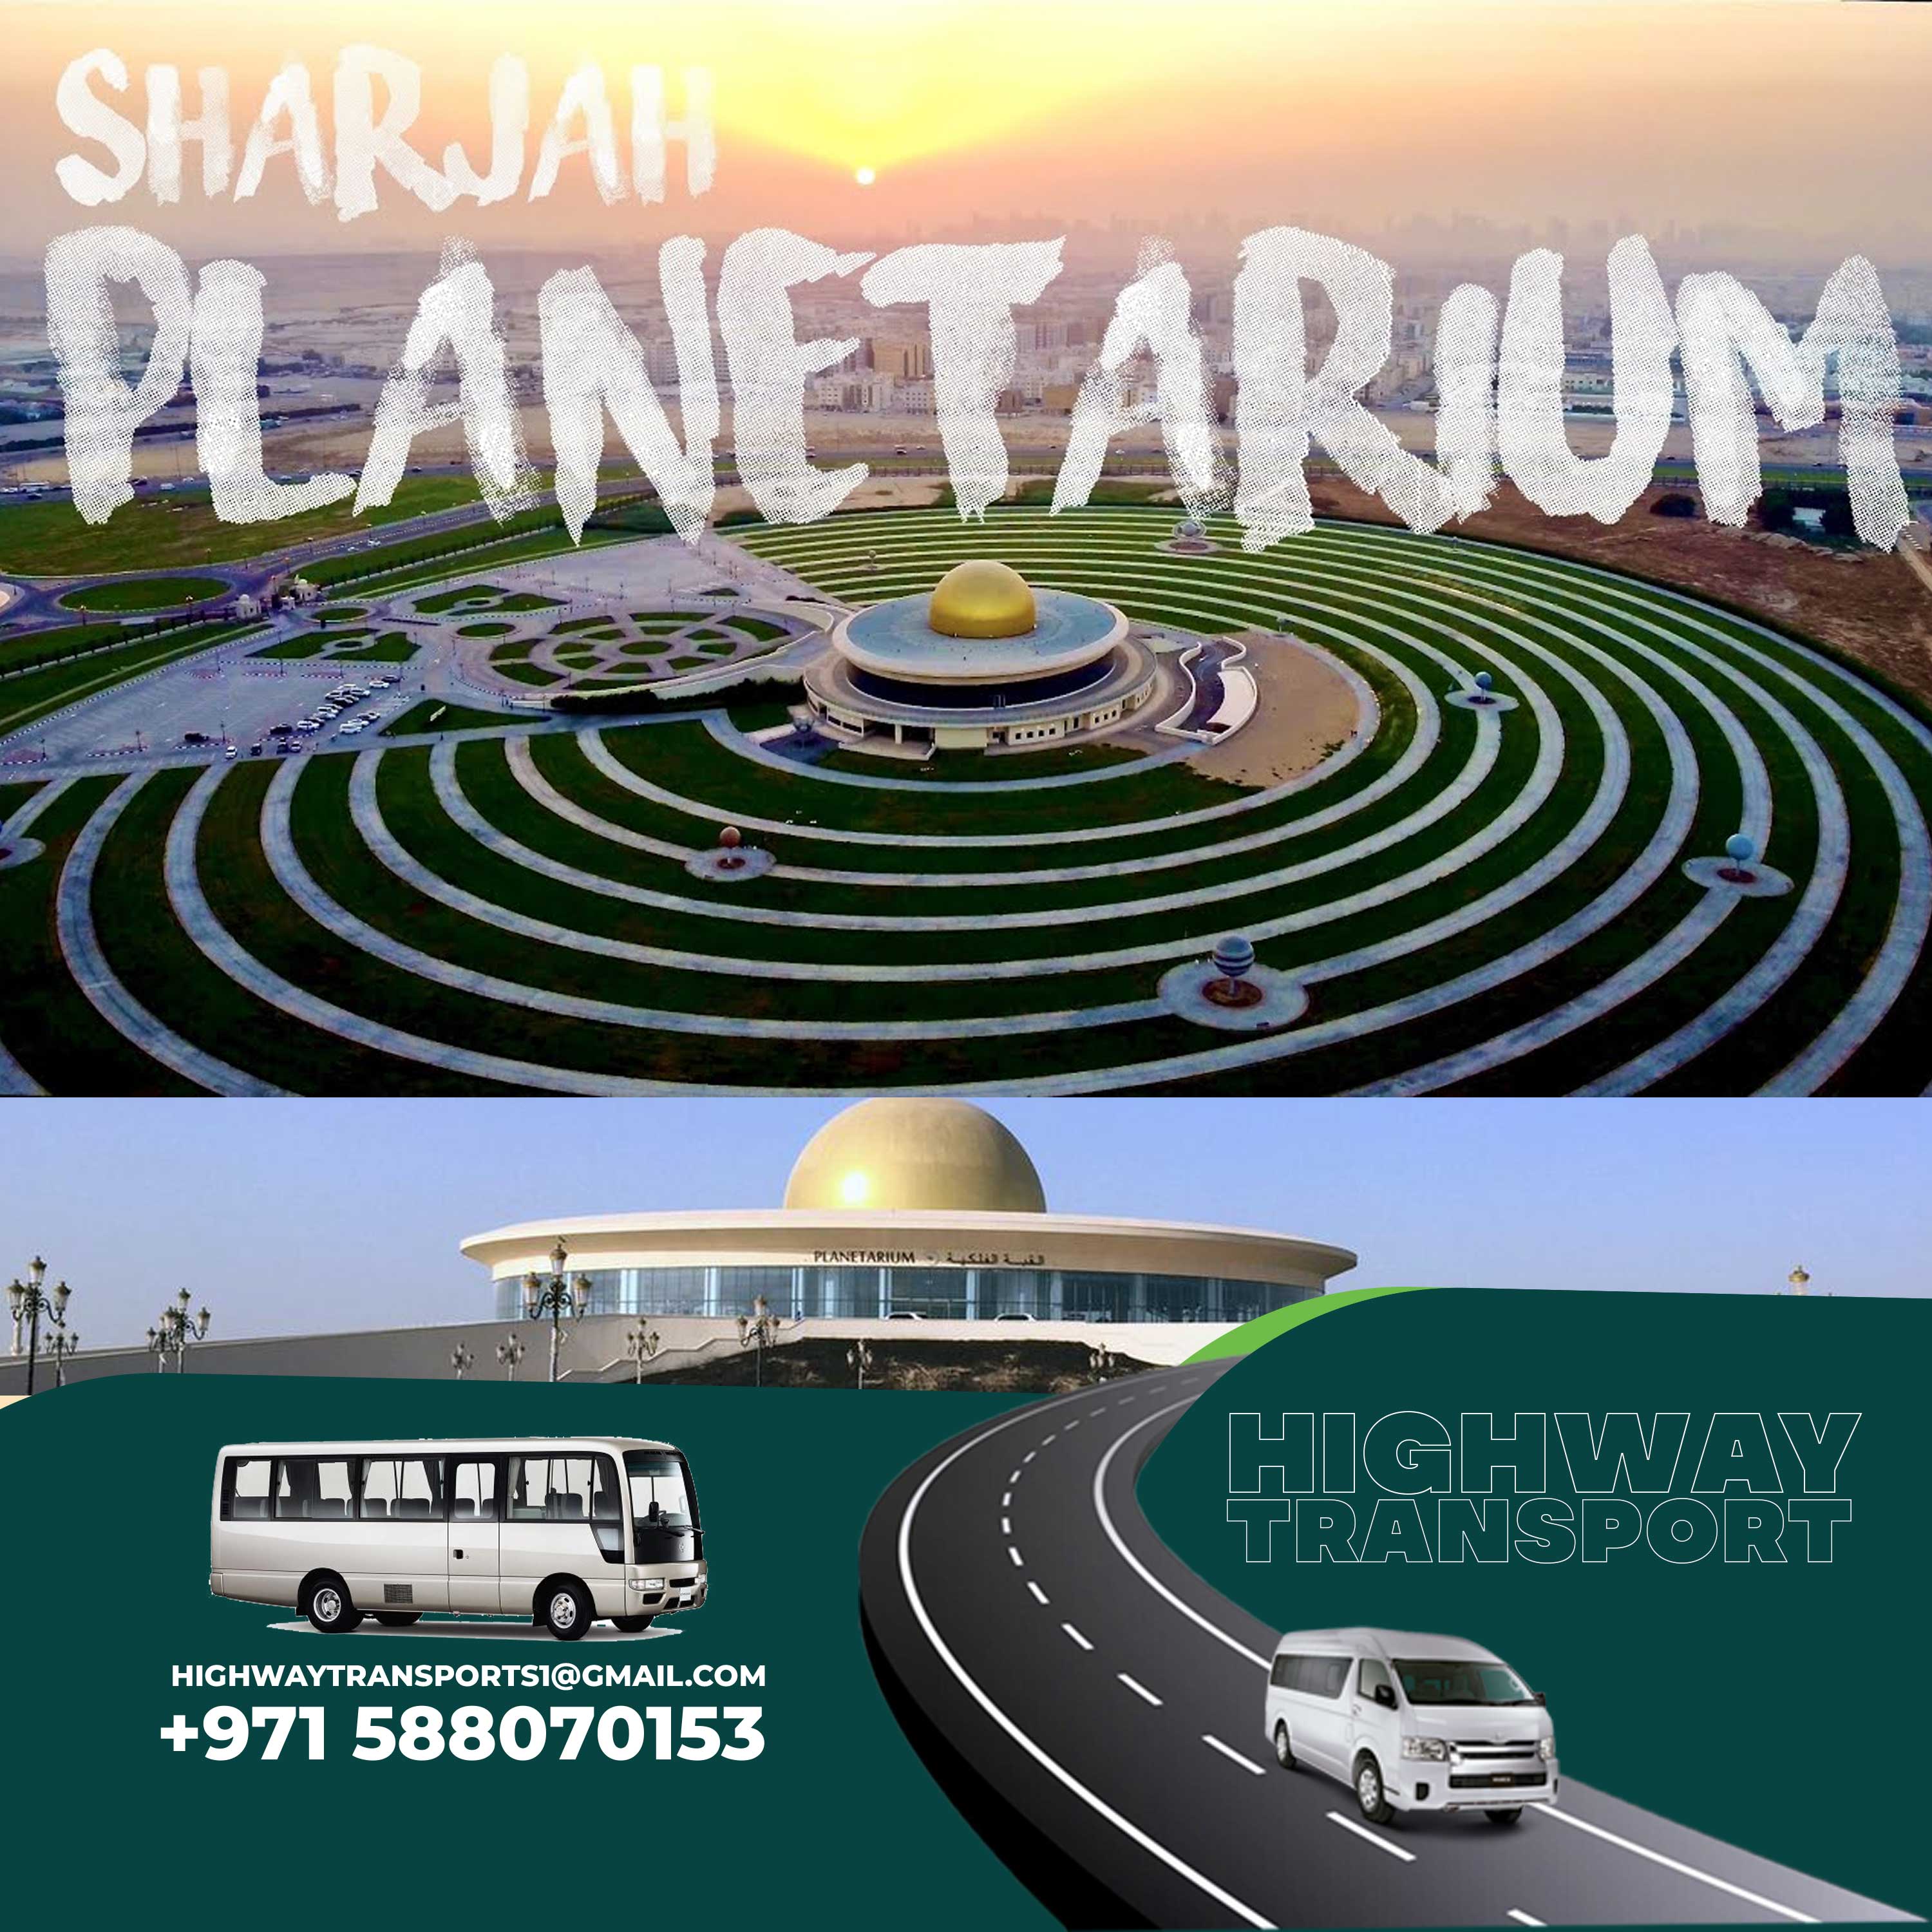 Interior of Sharjah Planetarium showcasing state-of-the-art technology and educational displays at Sharjah Space Center